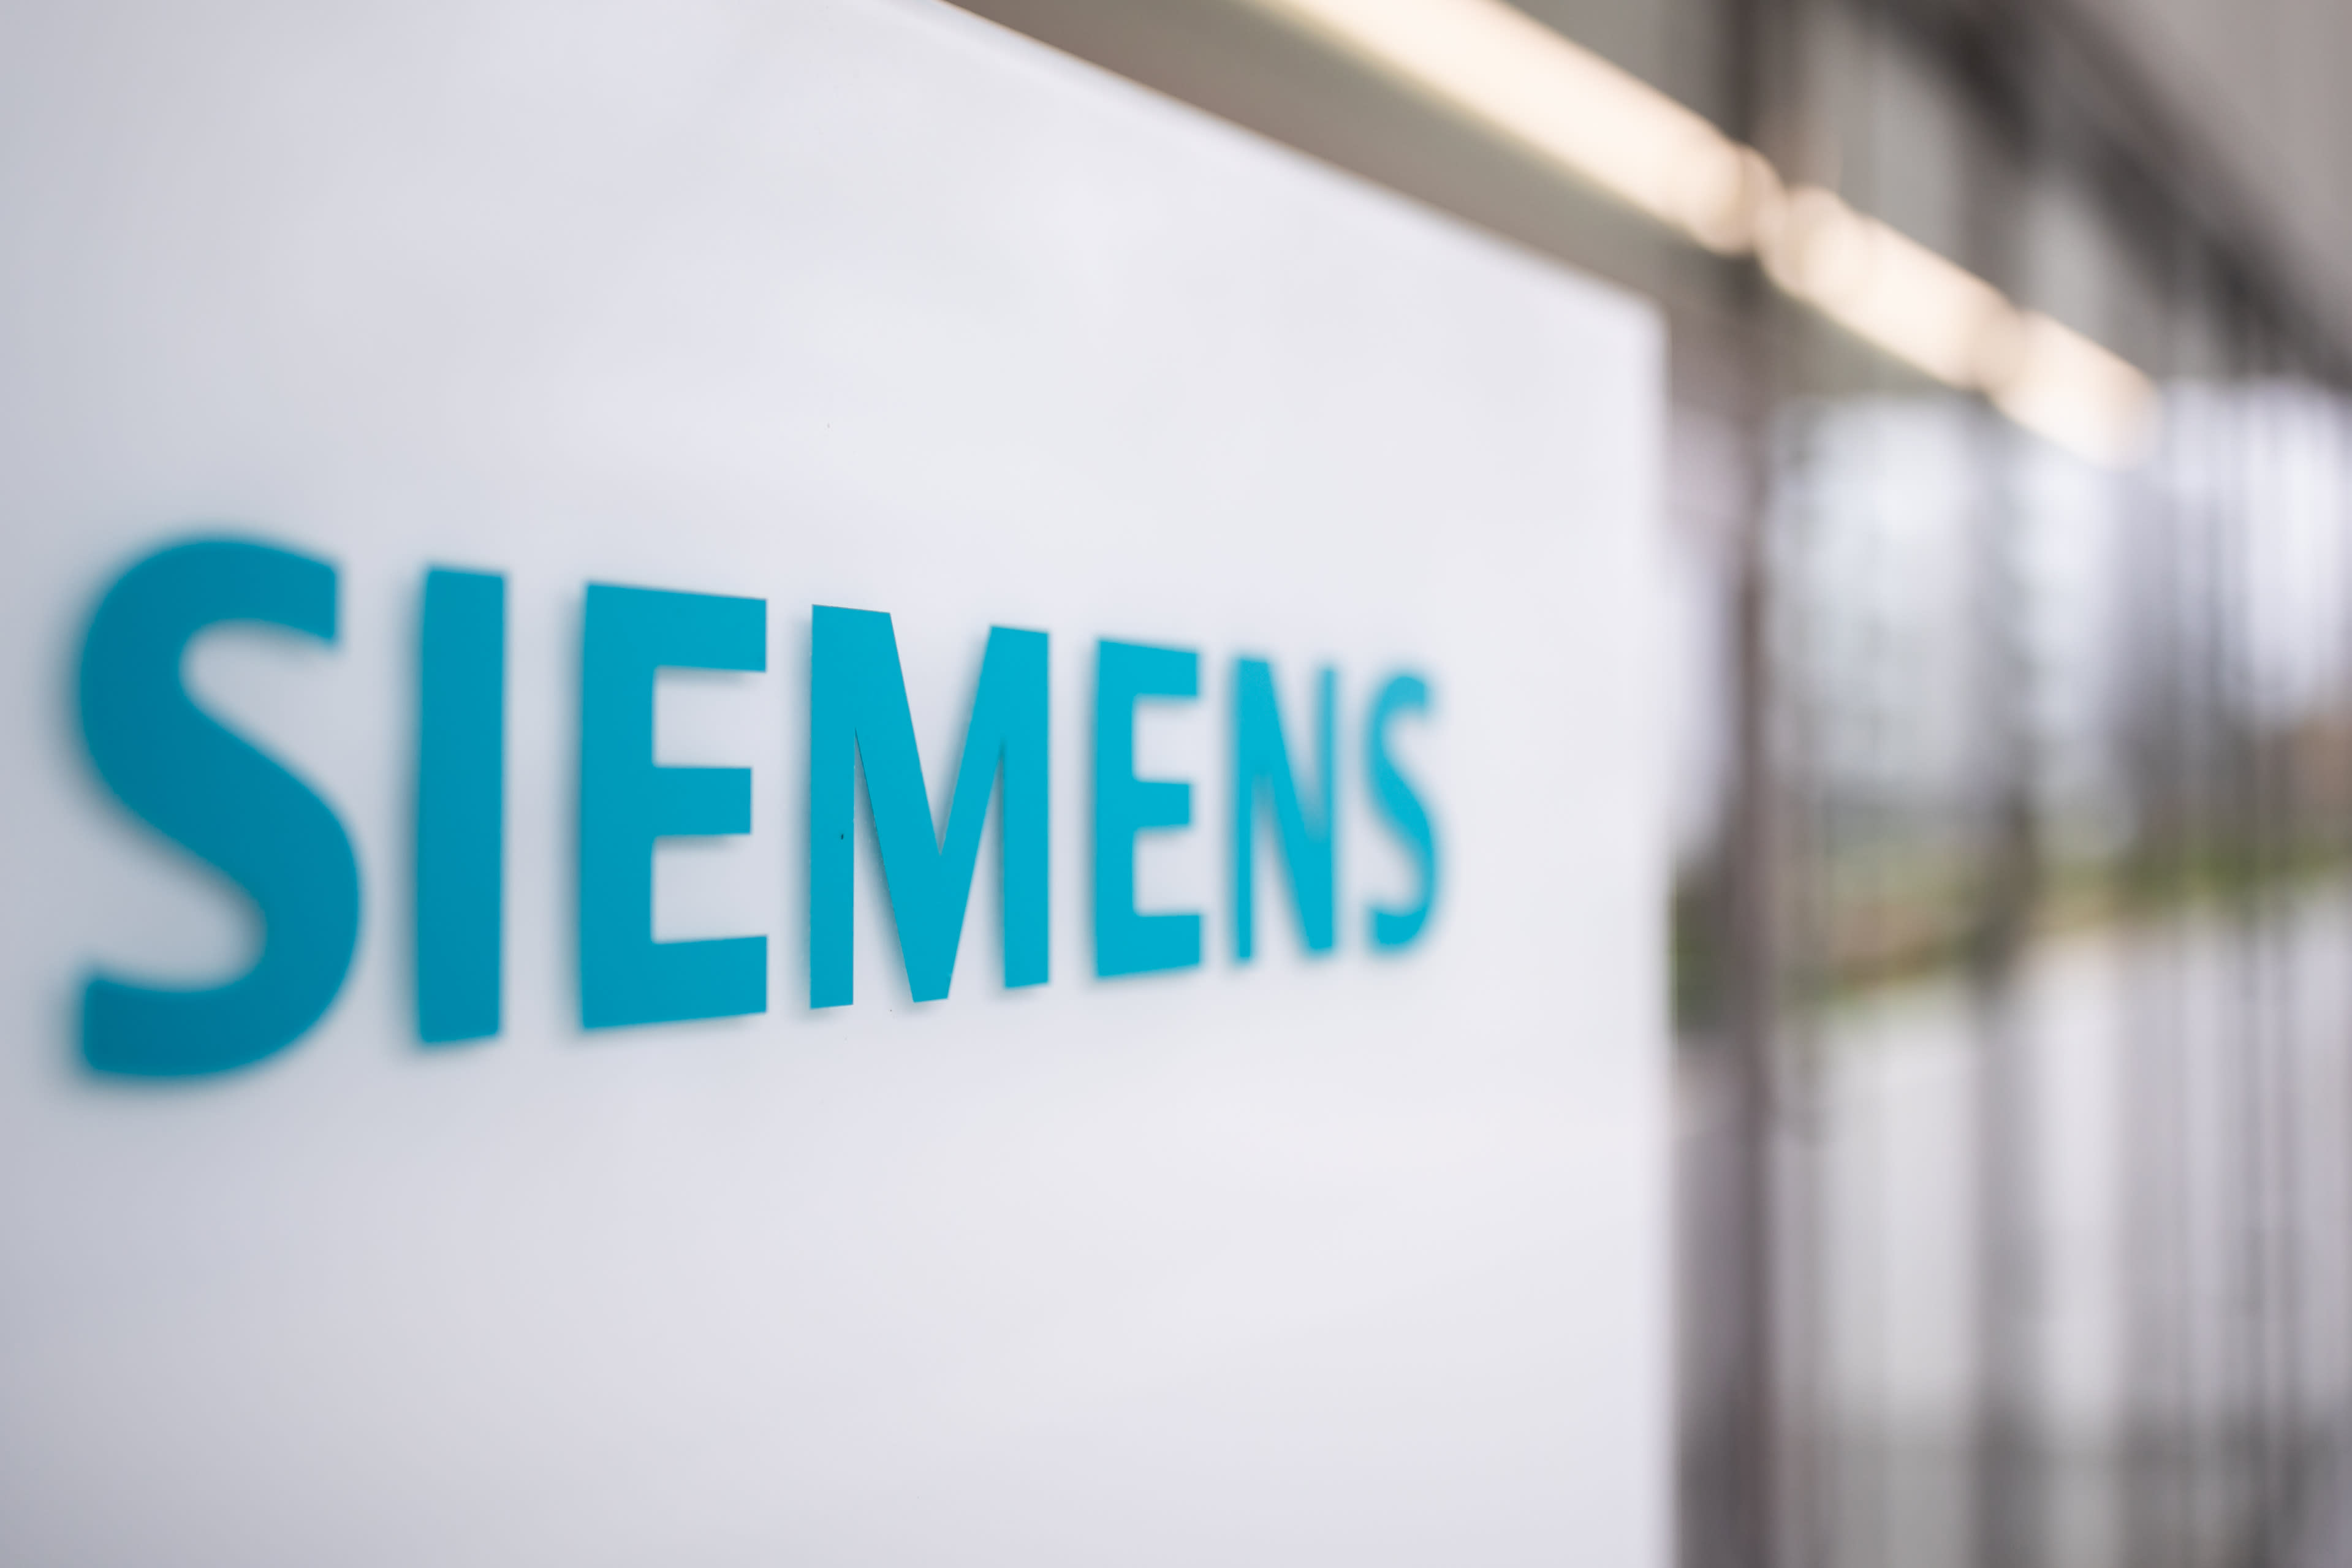 Siemens raises its outlook for the full year after sales in the second quarter beat forecasts